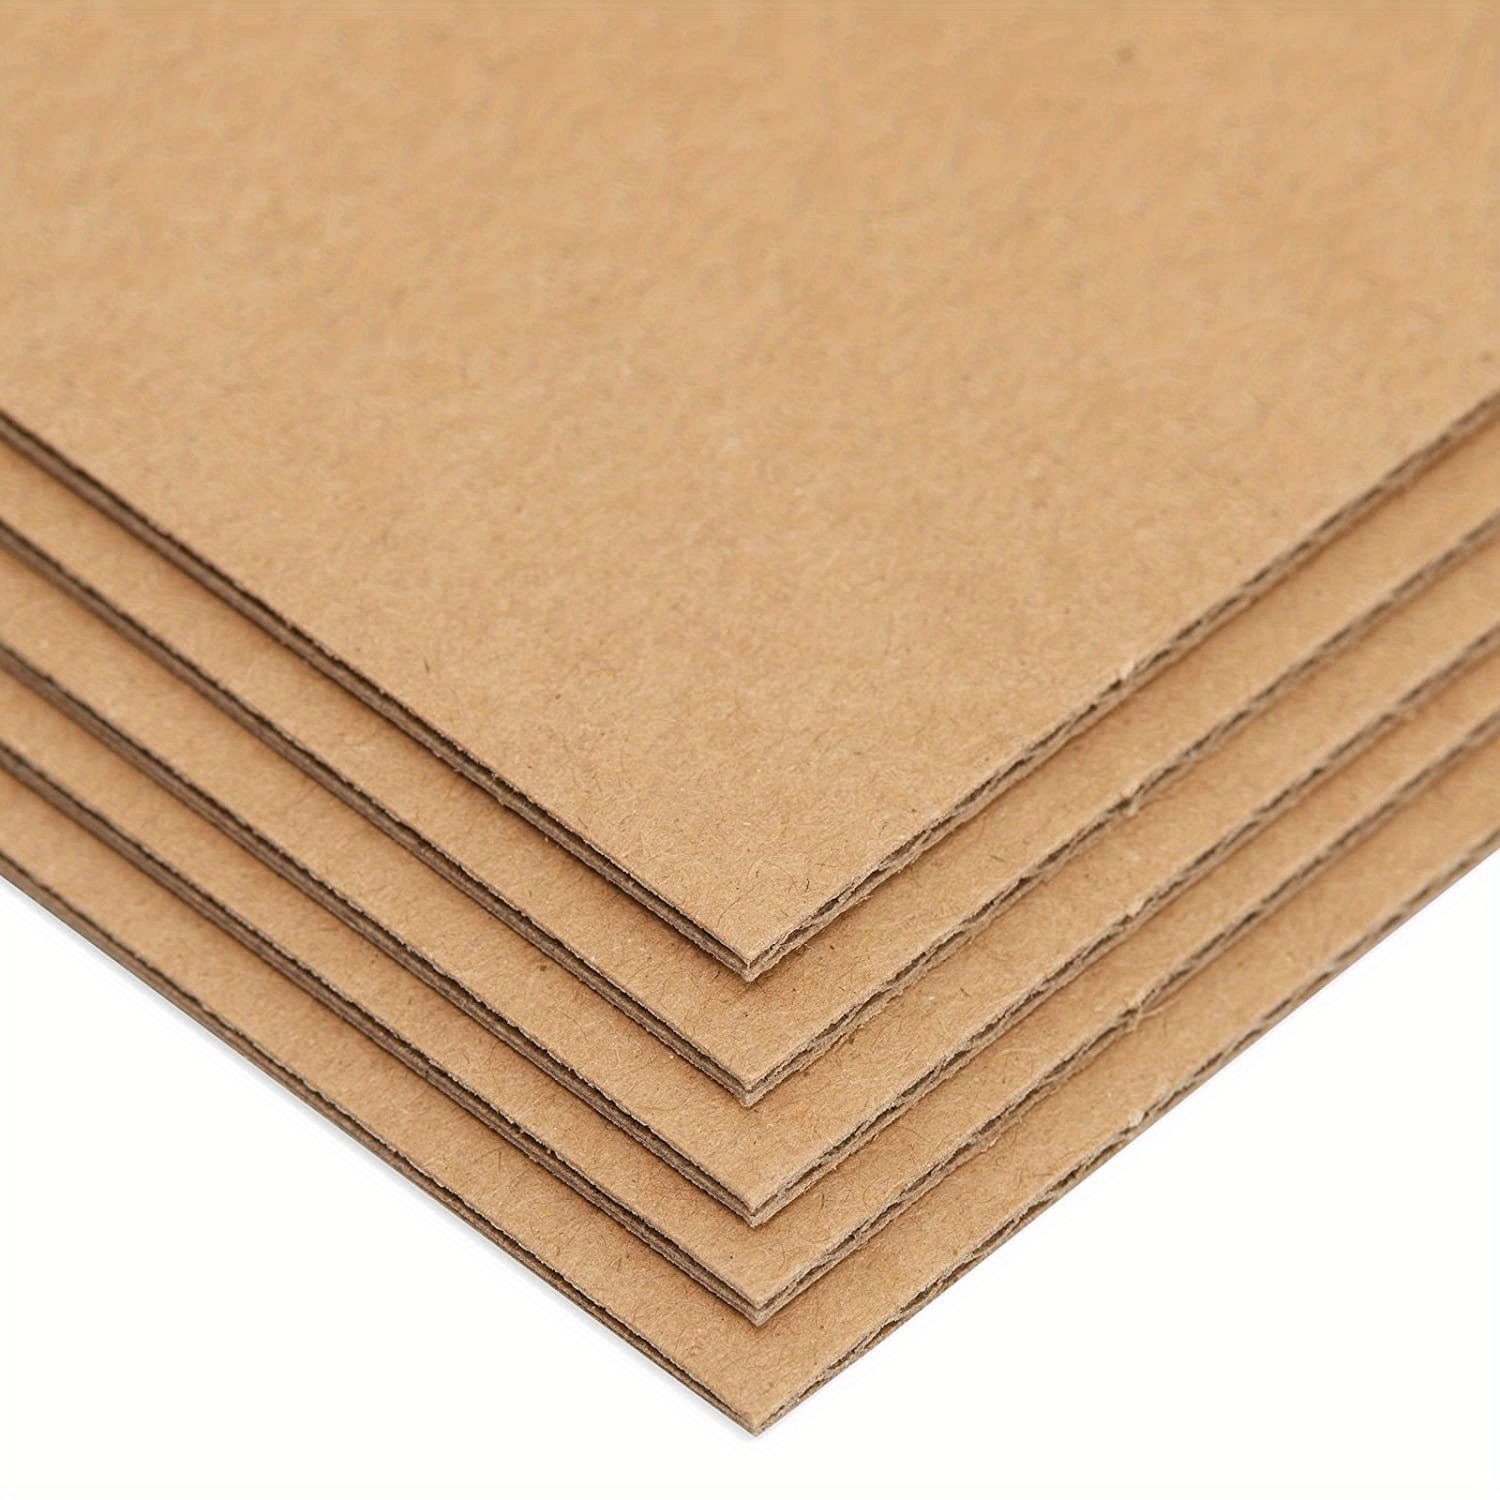 Wabjtam 200 Pack Corrugated Cardboard Sheets For Mailers, Flat Packaging  Inserts For Shipping, Mailing, Crafts, 2mm Thick (5 X 7 In)